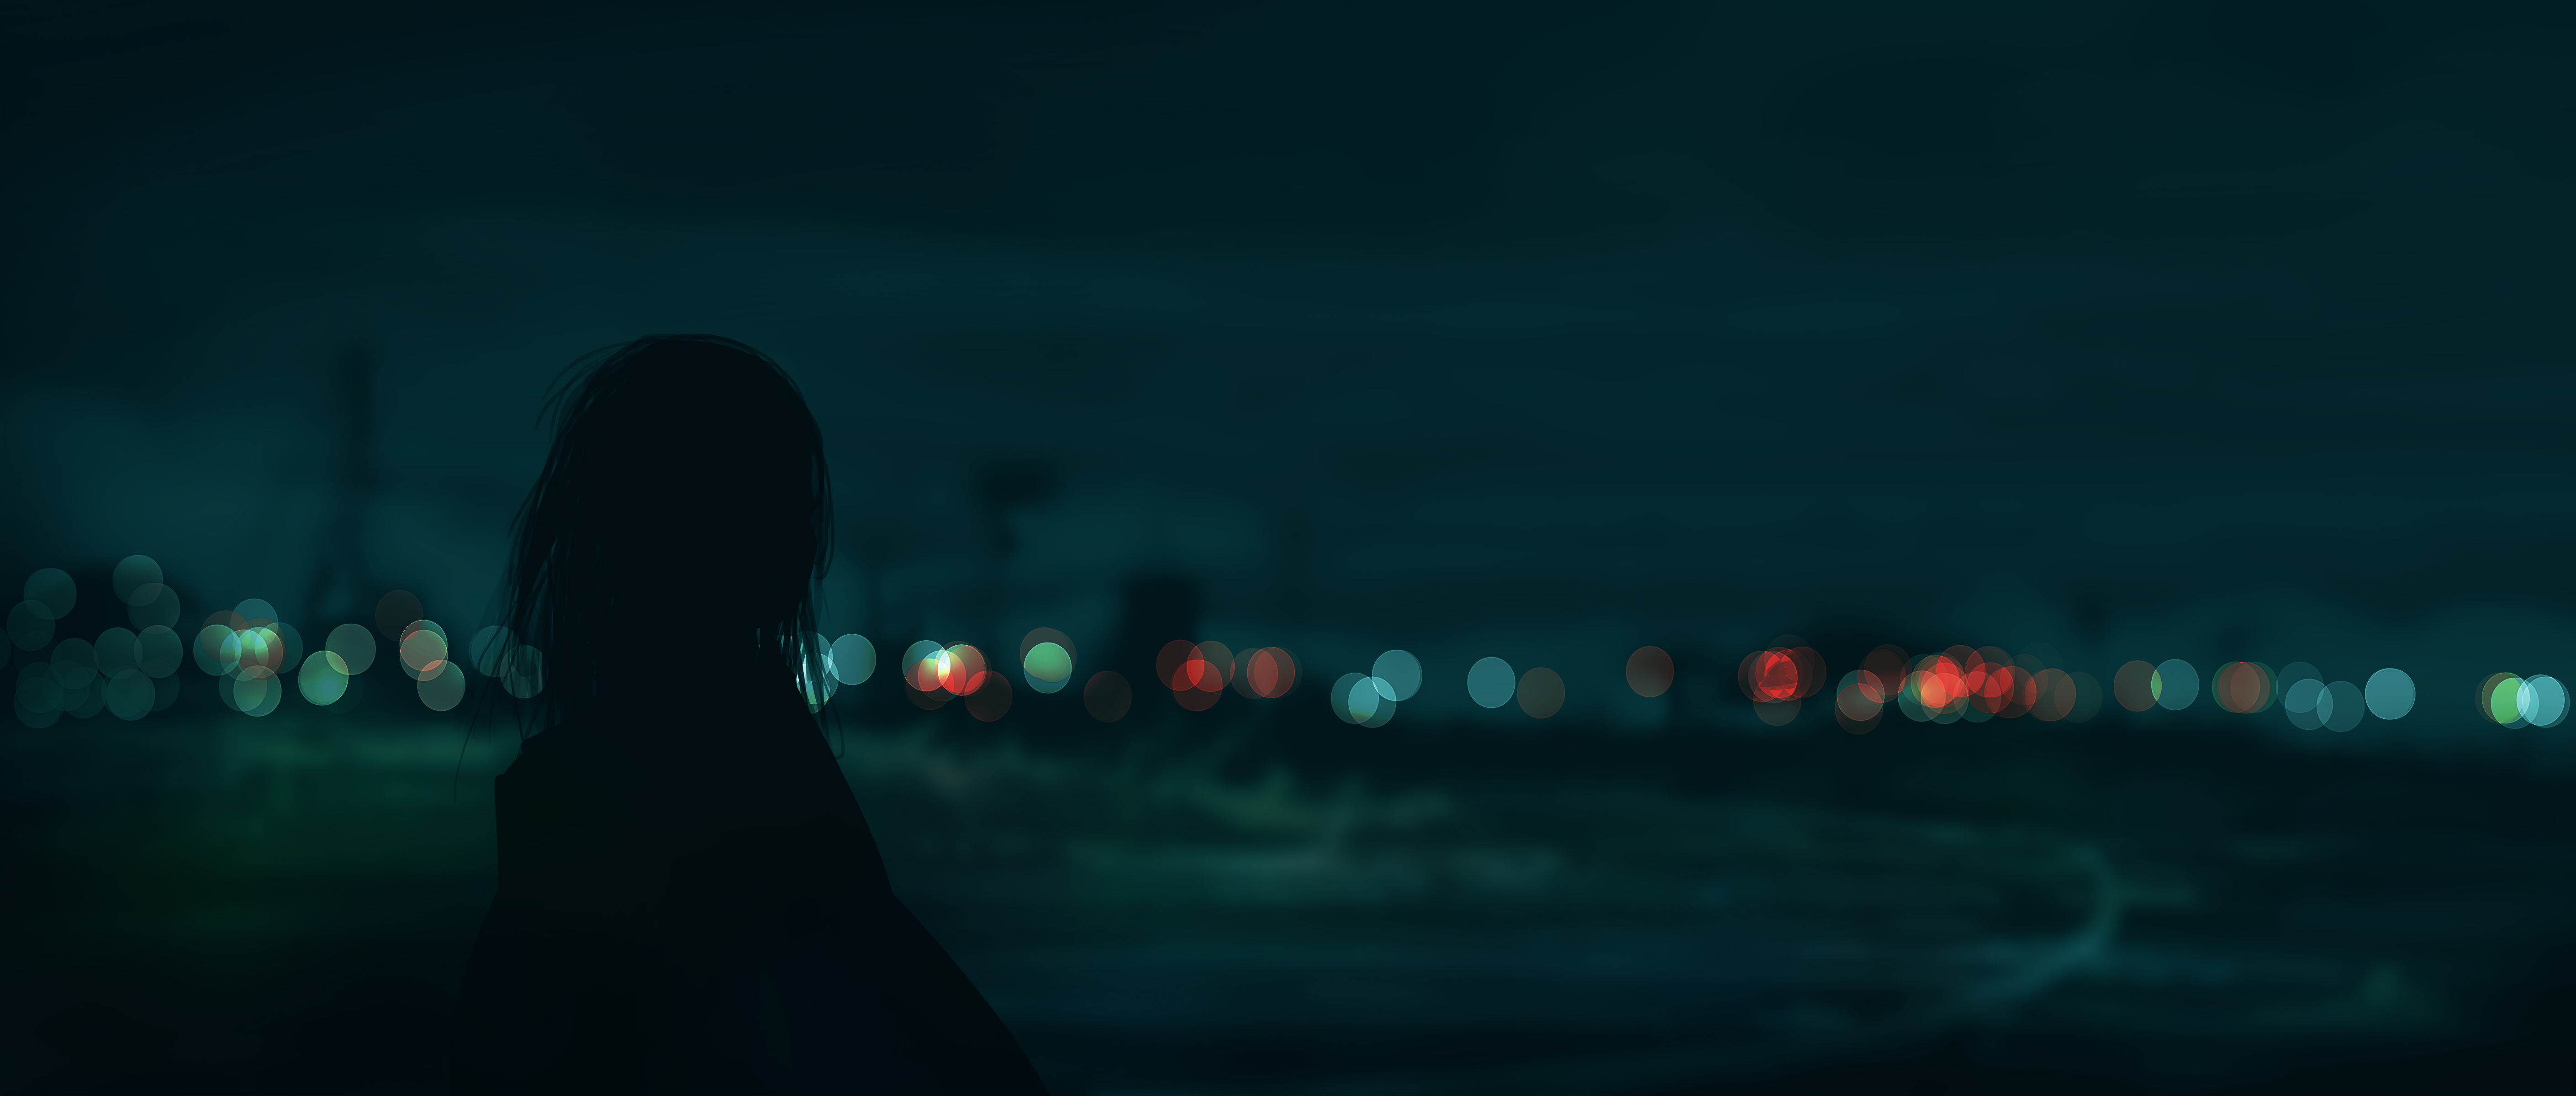 Anime 5640x2400 anime anime girls landscape blurred blurry background bokeh silhouette Gracile looking into the distance night city lights city